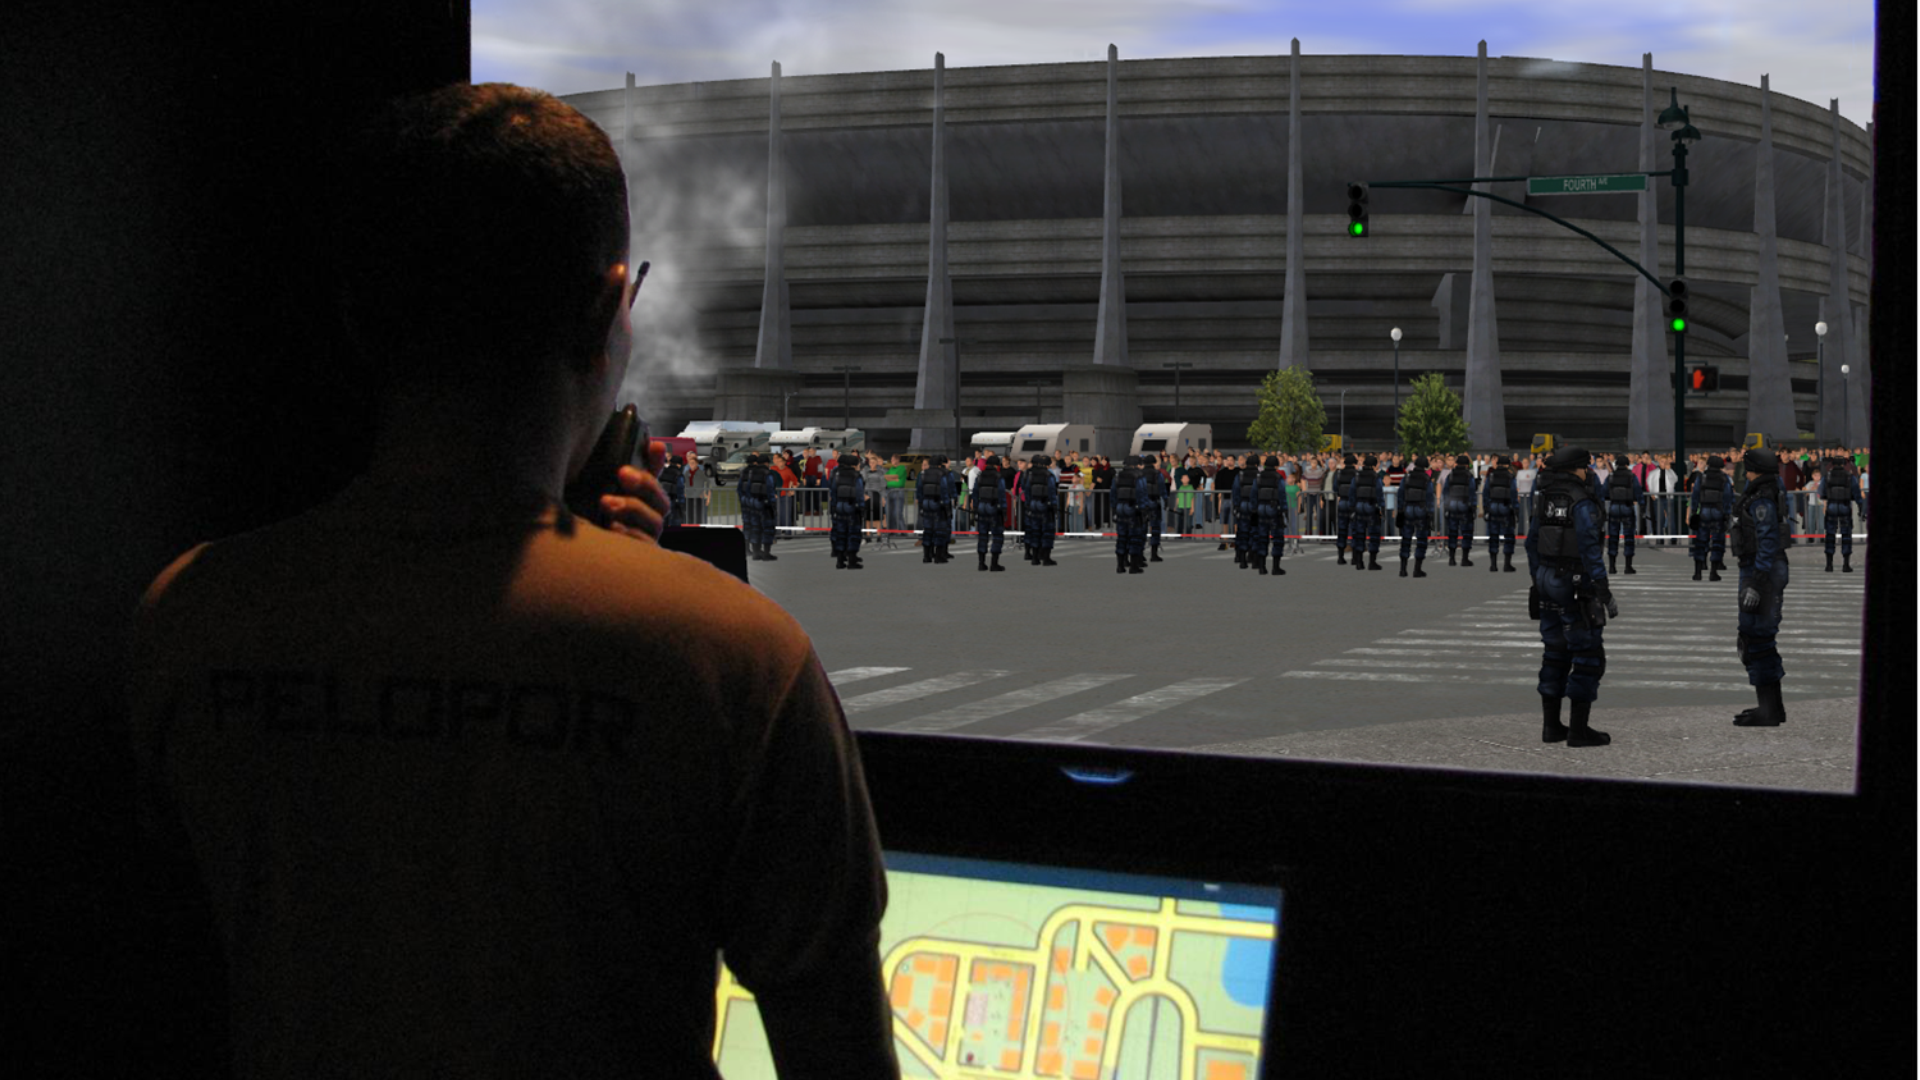 Police Commander responding to a large crowd gathered at a sports stadium in a virtual exercise.